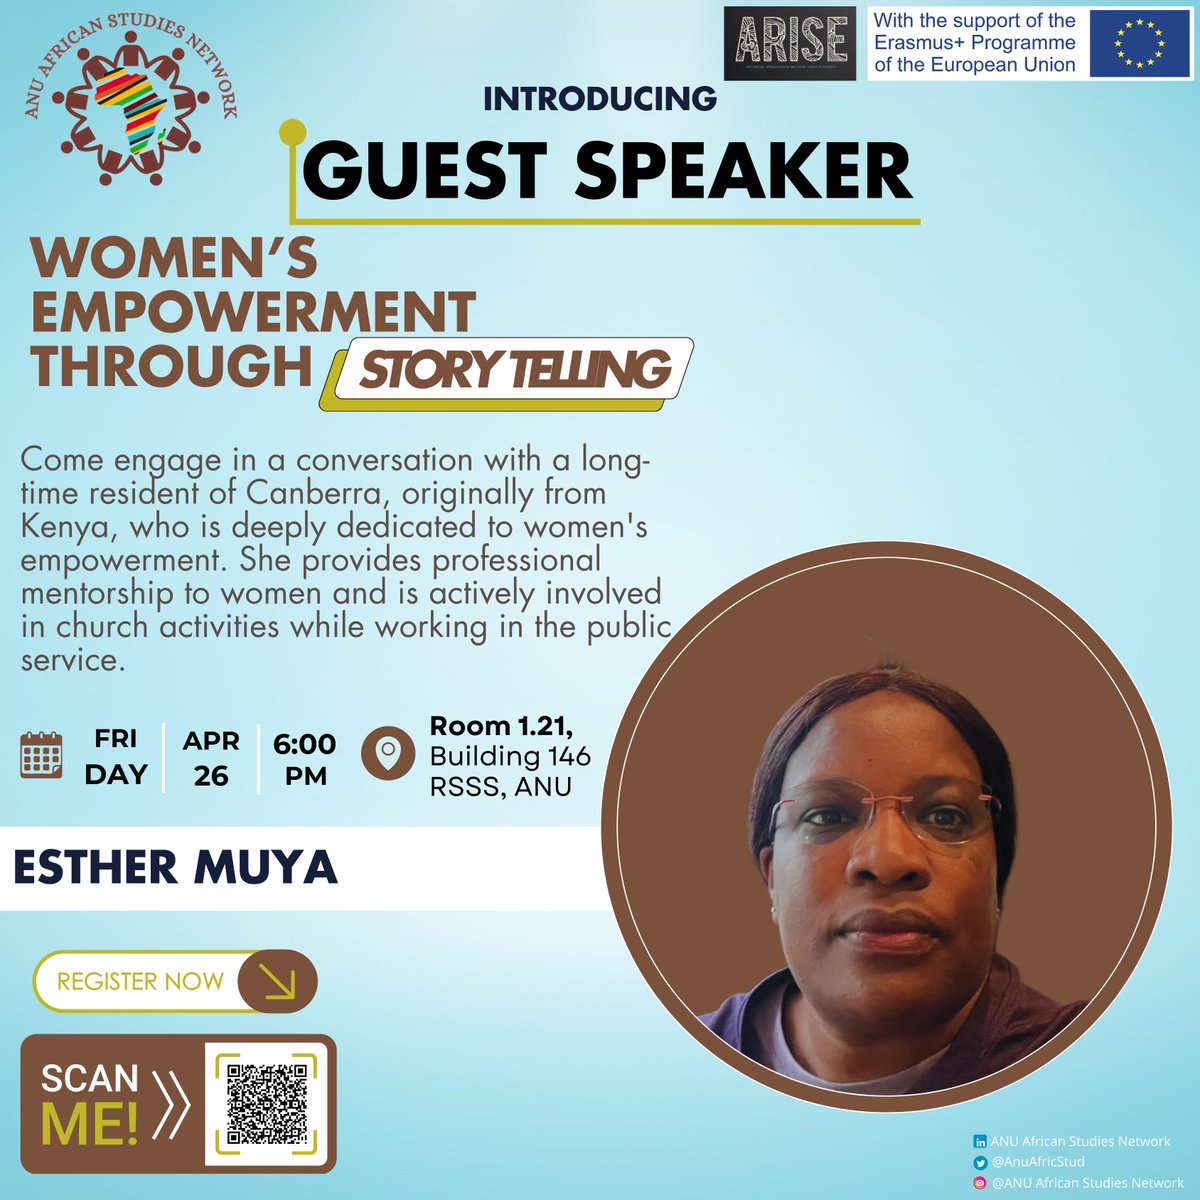 We are excited to introduce Esther Muya as our next panellist for the upcoming session. Esther is originally from Kenya and has been living in Canberra for a long time. She empowers women through her mentoring initiative, church, and work in public service. #ANU #Africa #Women